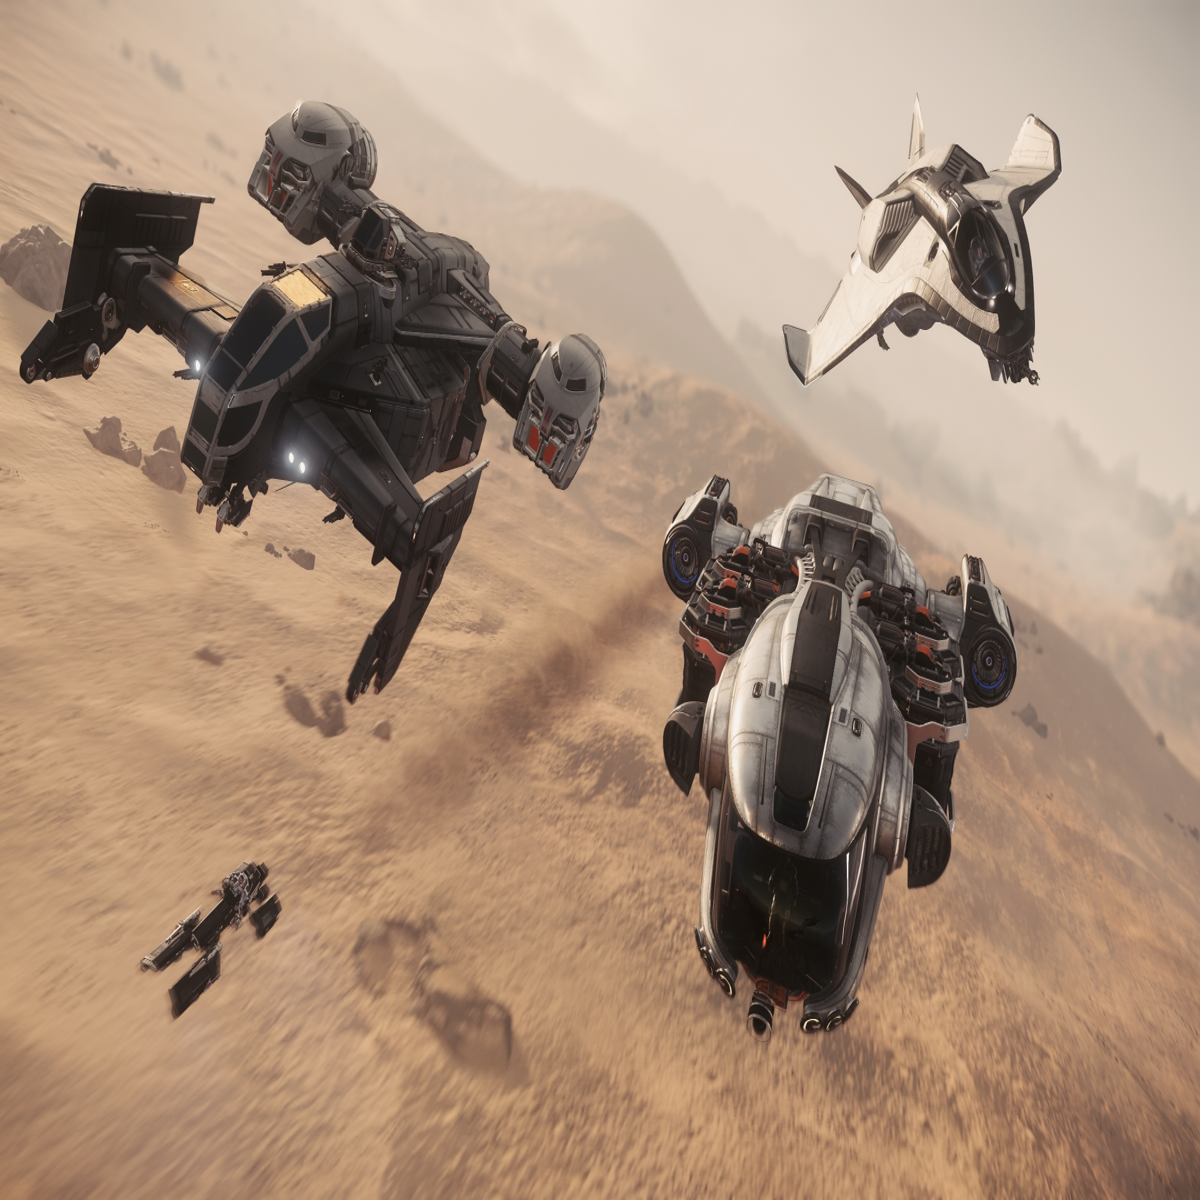 Star Citizen FreeFly This Week!